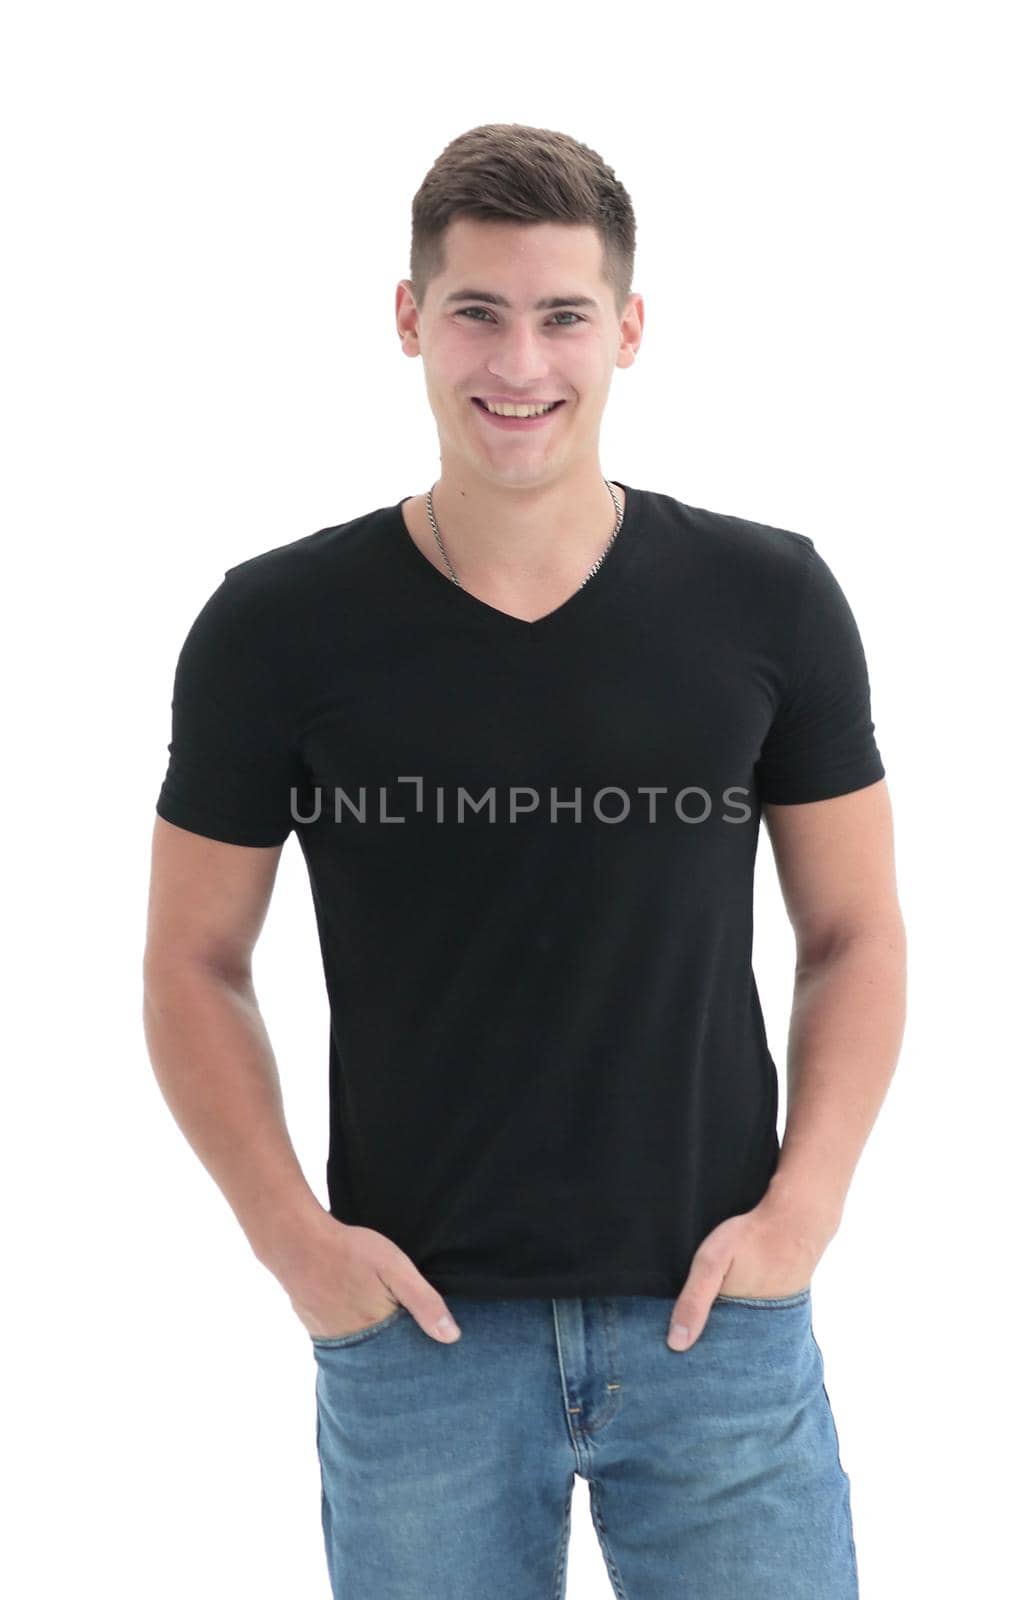 in full growth. casual guy in black t-shirt . isolated on white background